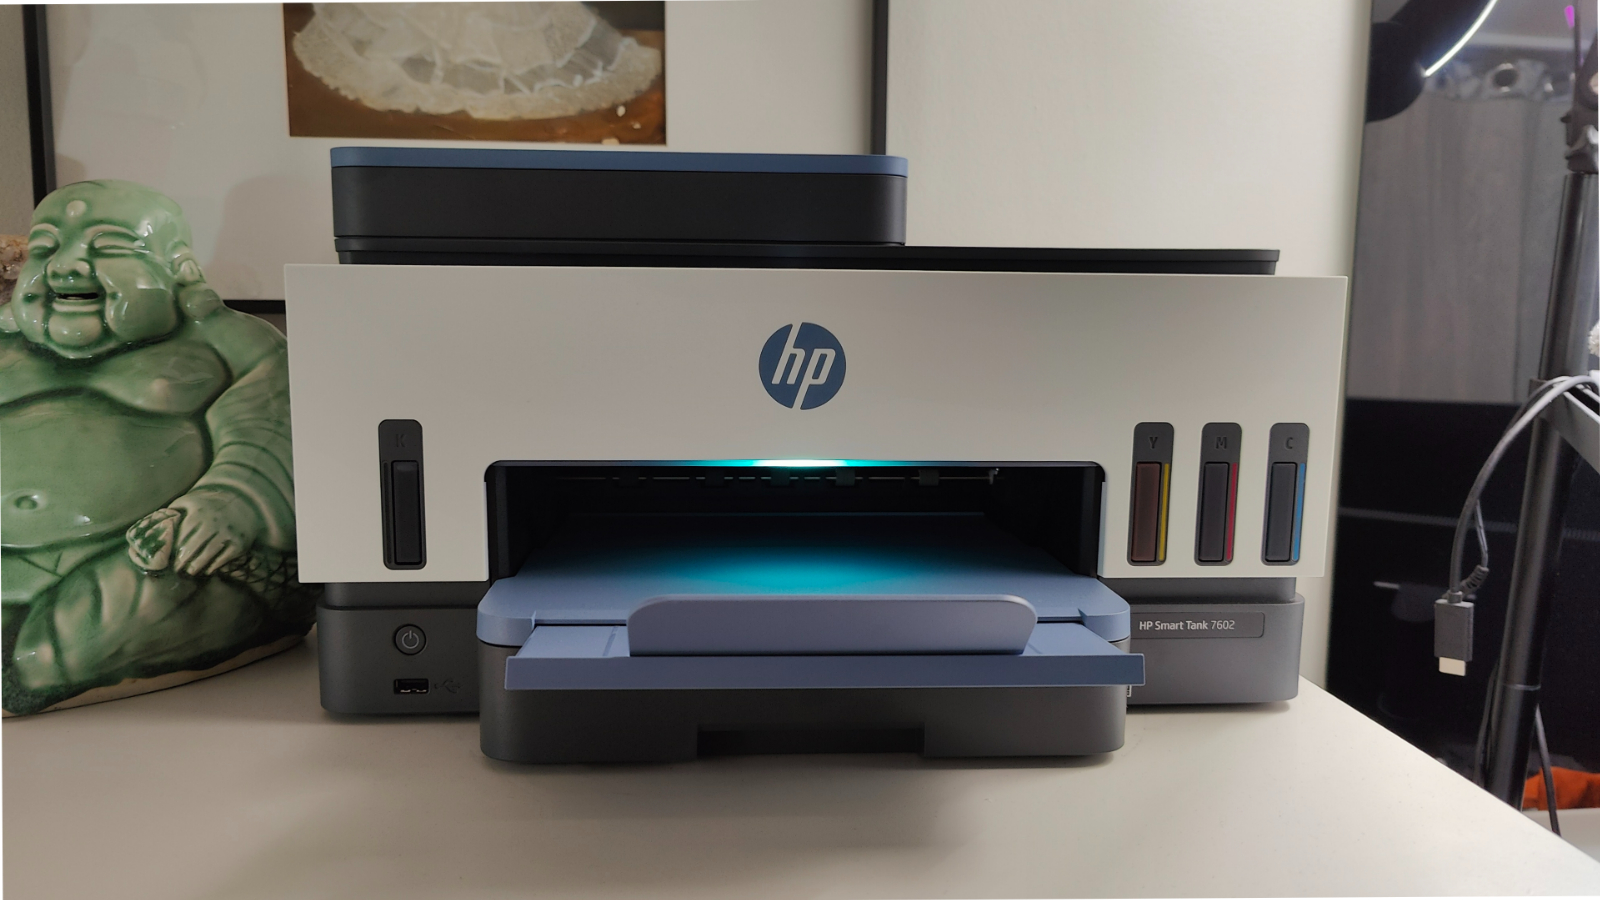 HP Smart Tank 7602 All-in-One Printer Review